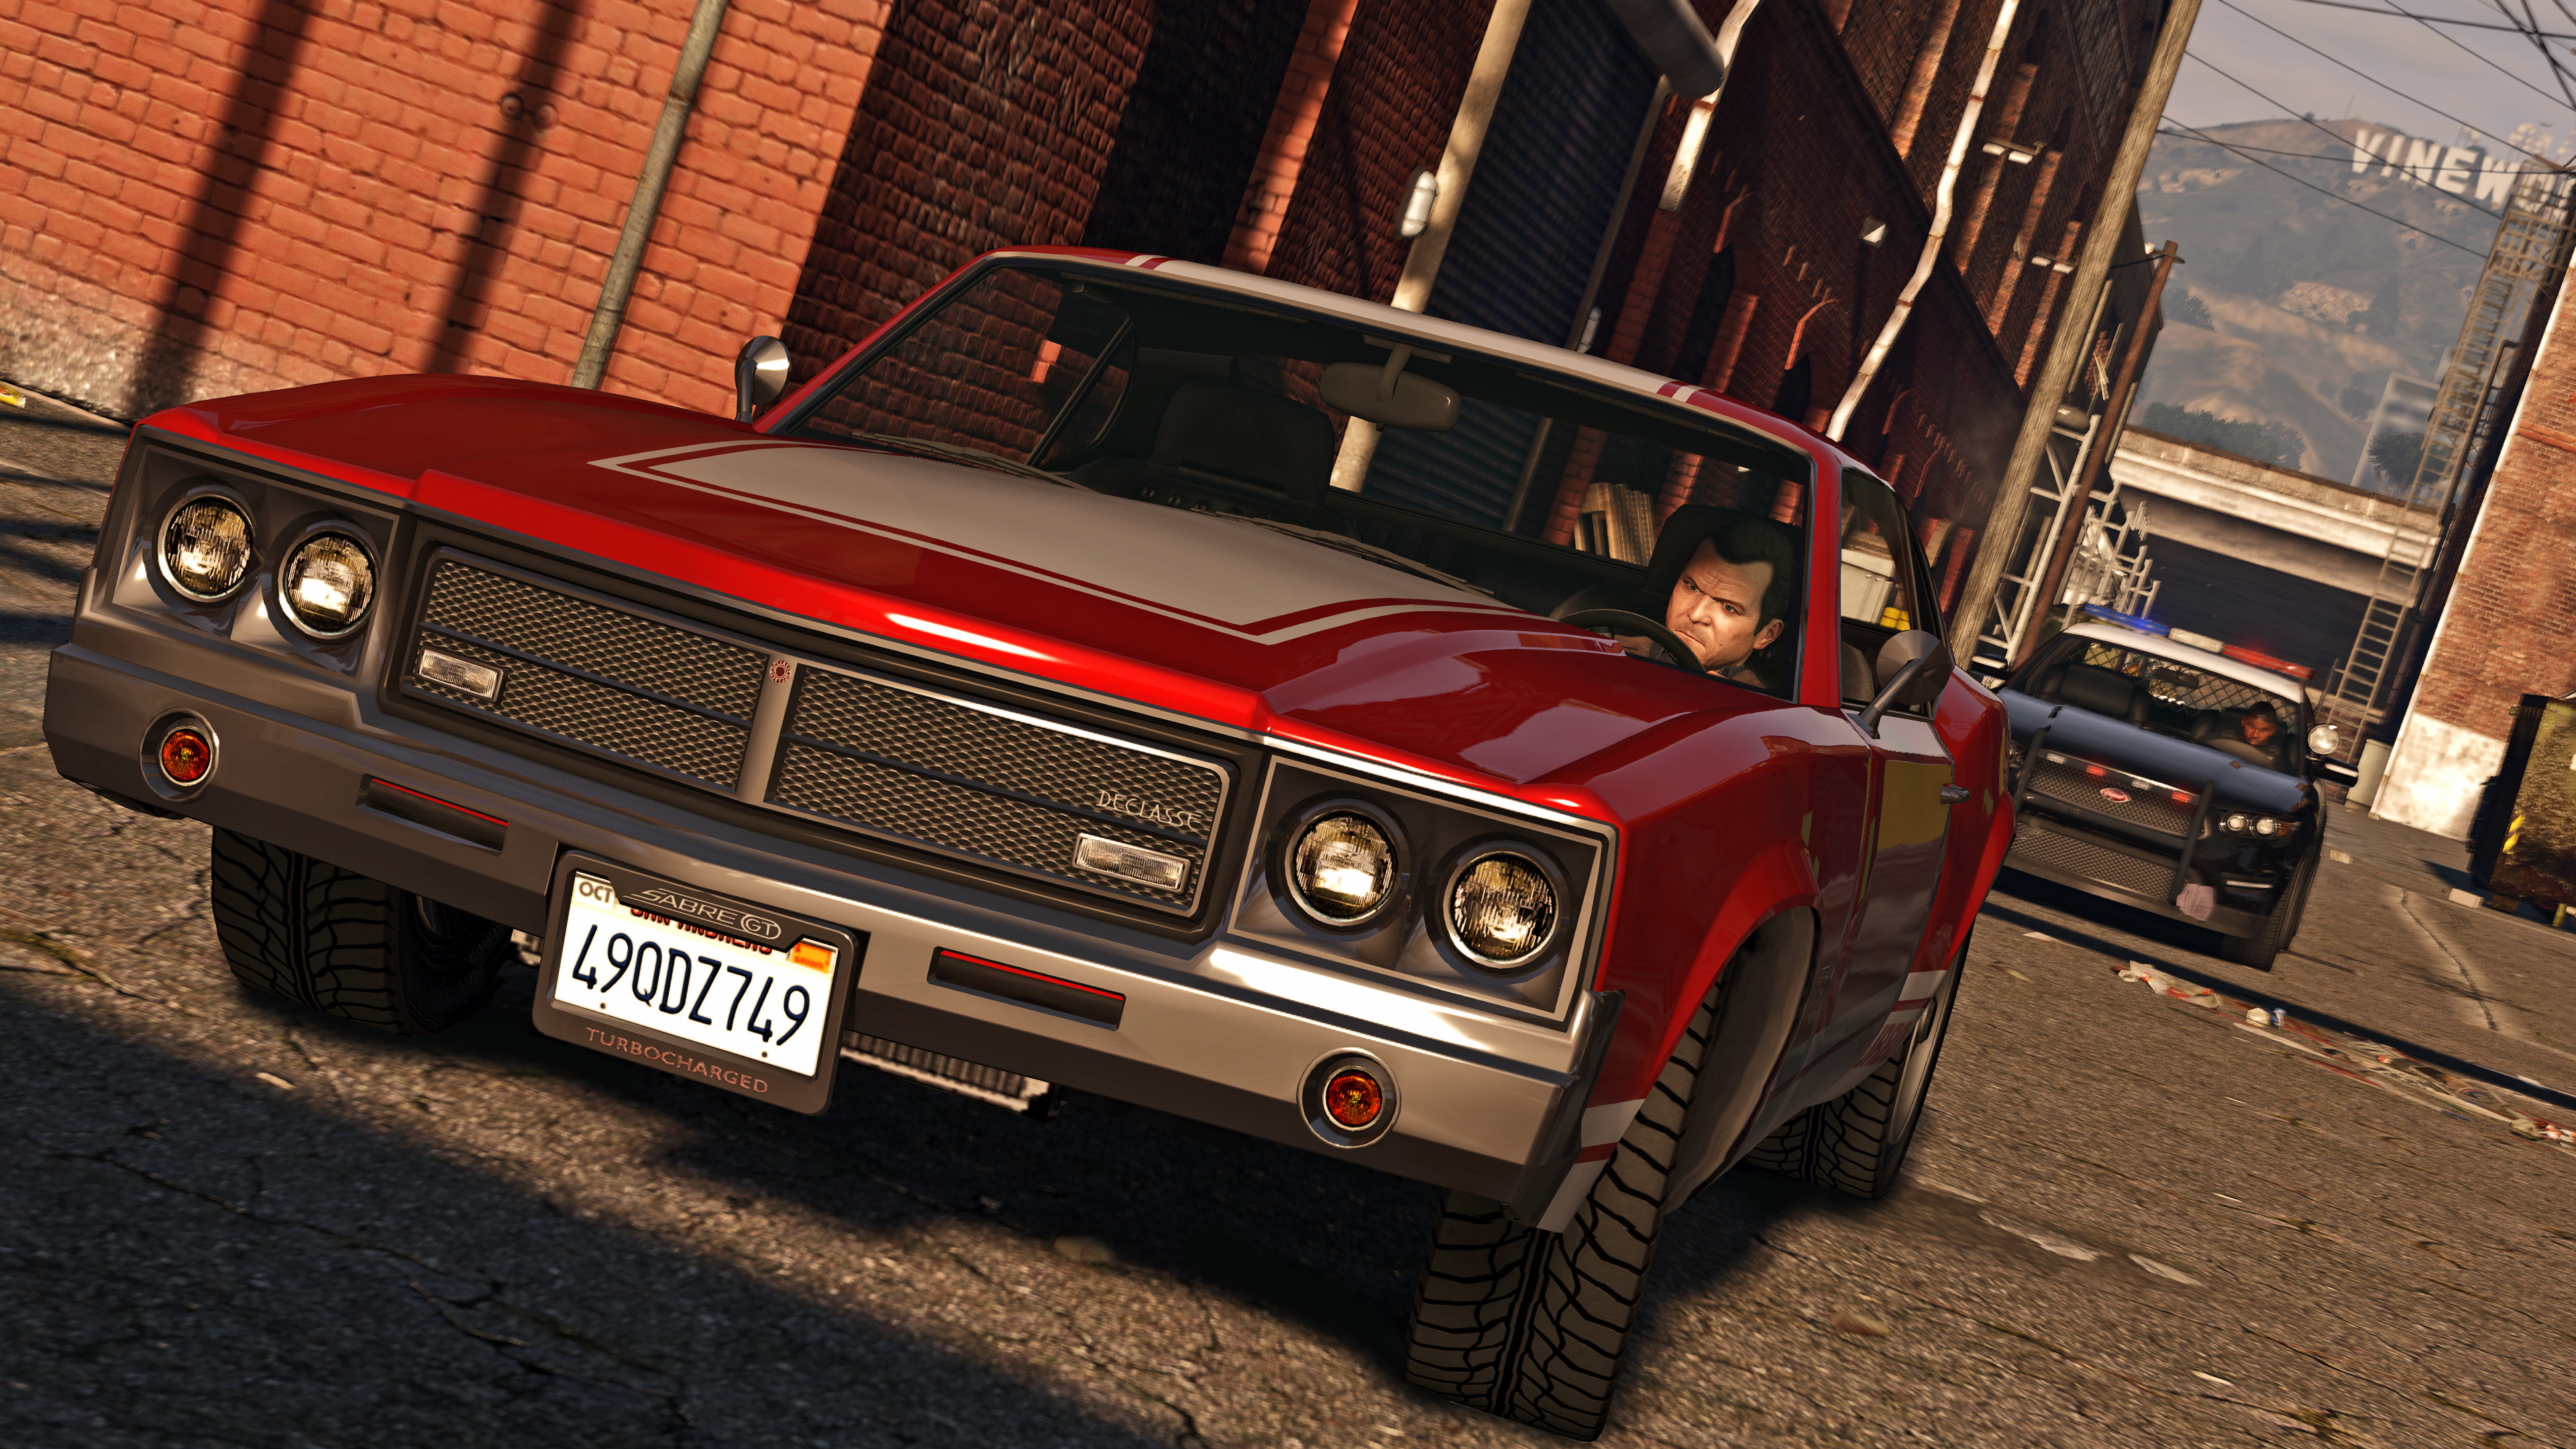 GTA 6 leak is a loss for Rockstar, leaker, and Grand Theft Auto fans: MIchael from GTA 5 drives a car down an alleyway